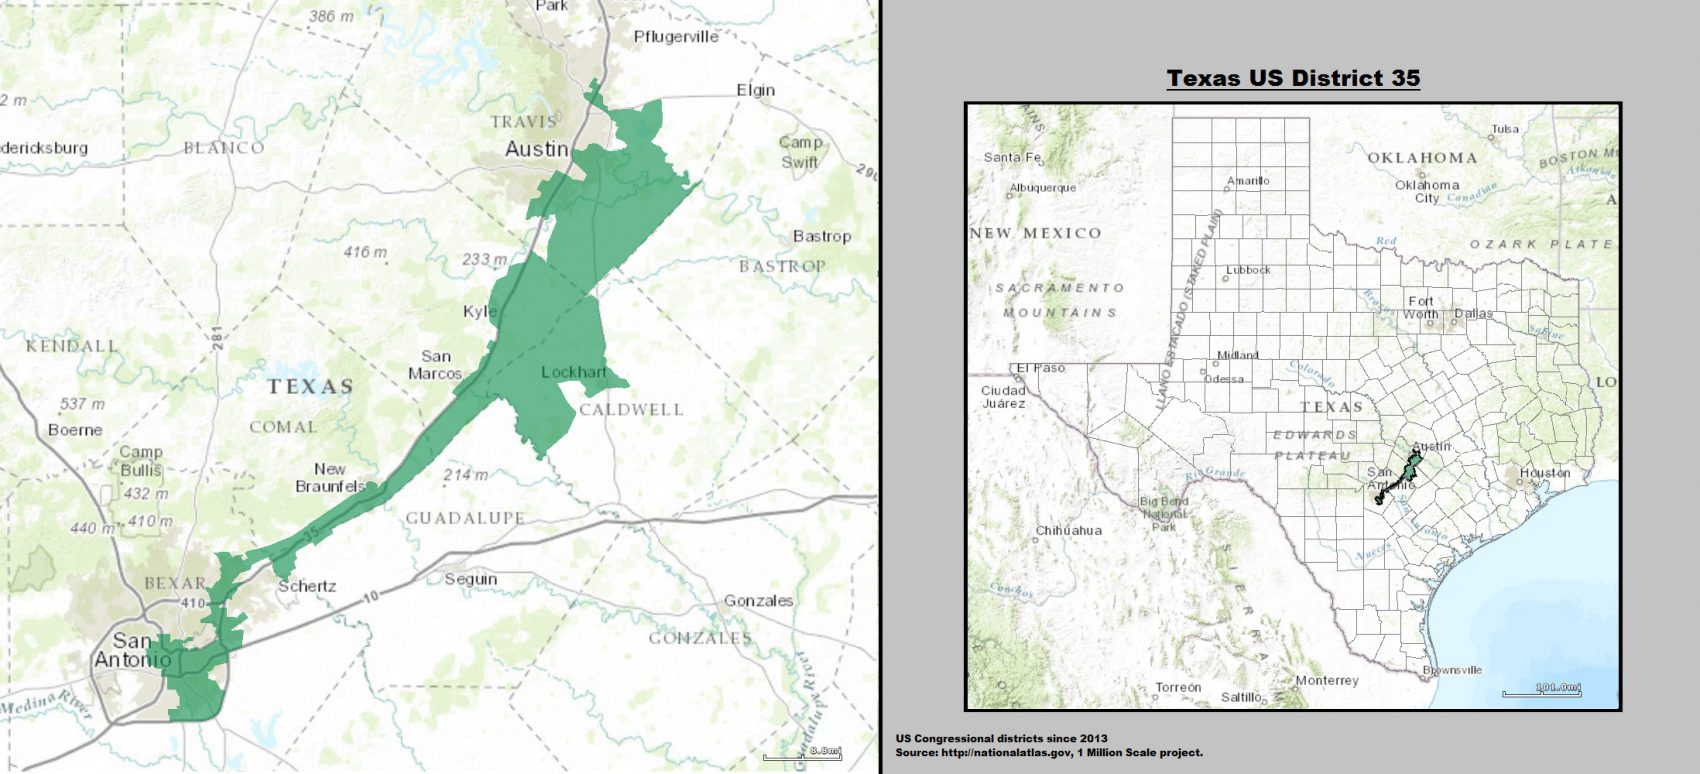 Texas US Congressional District 35 since 2013 1